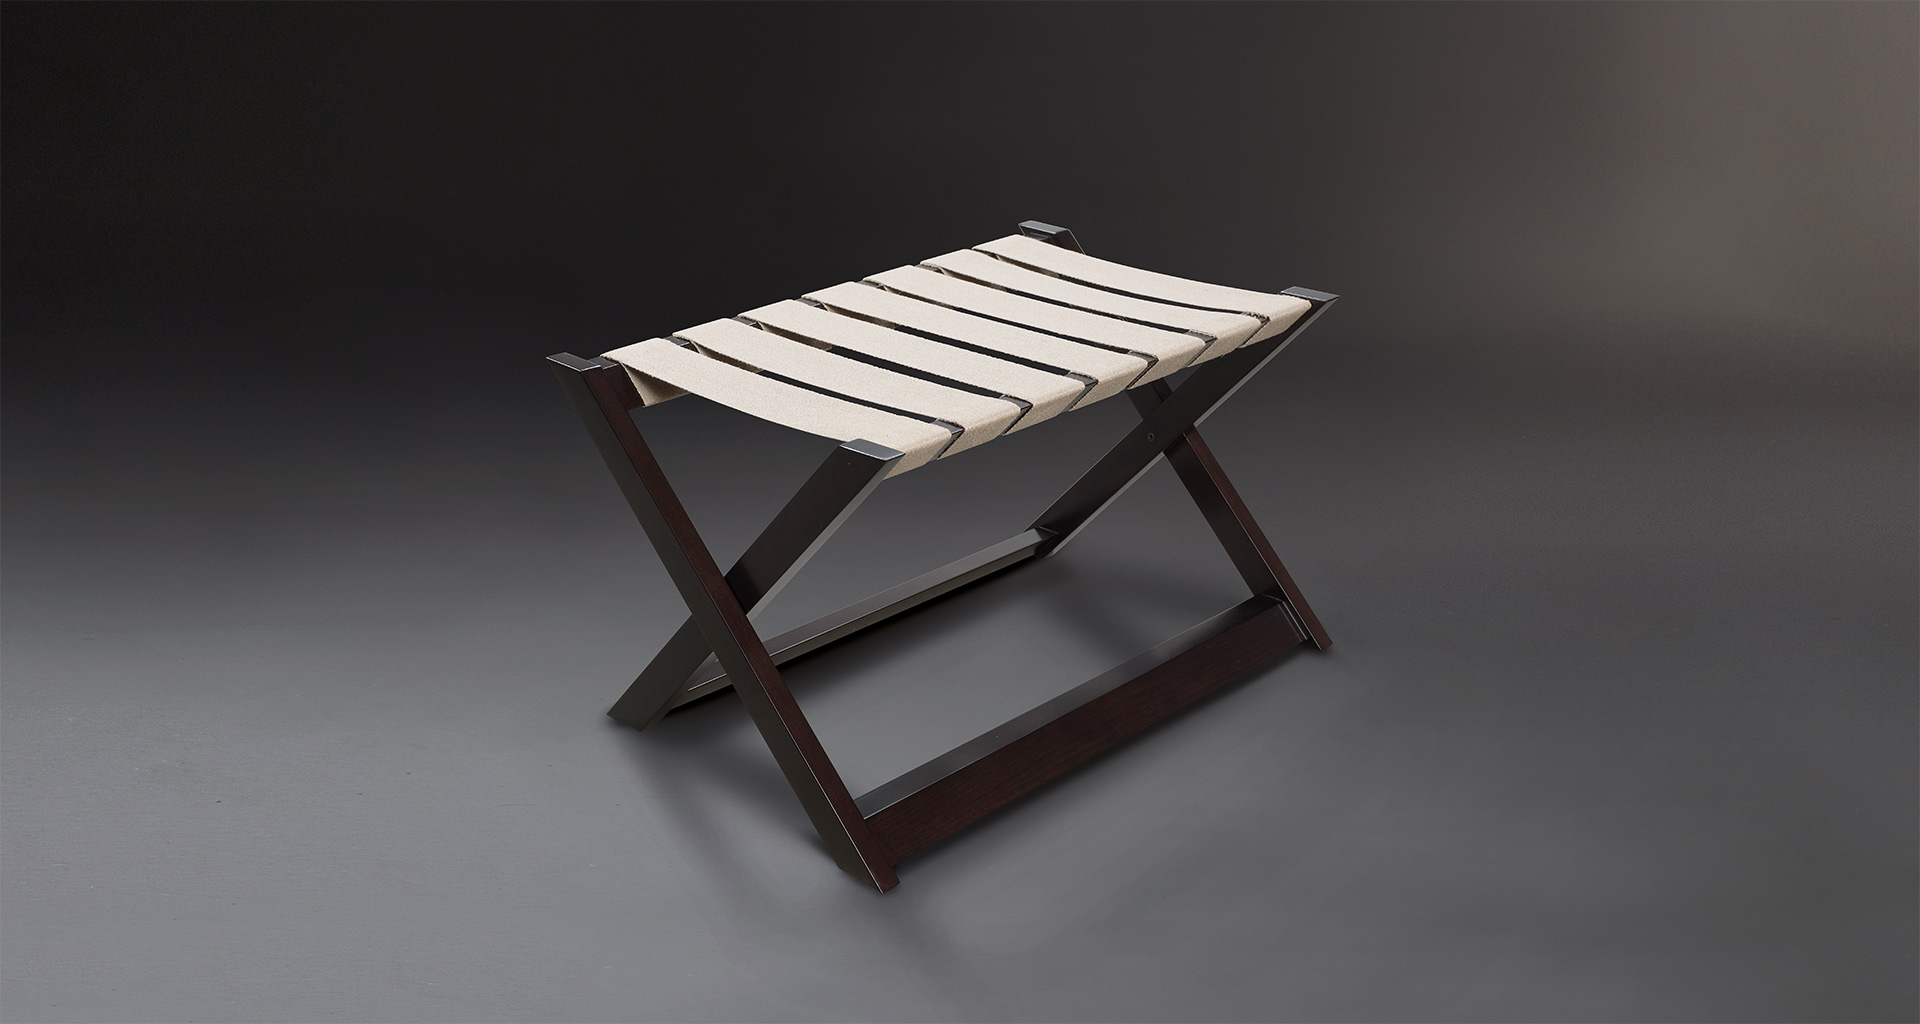 Achille is a folding wooden small table with a tray from Promemoria's catalogue | Promemoria